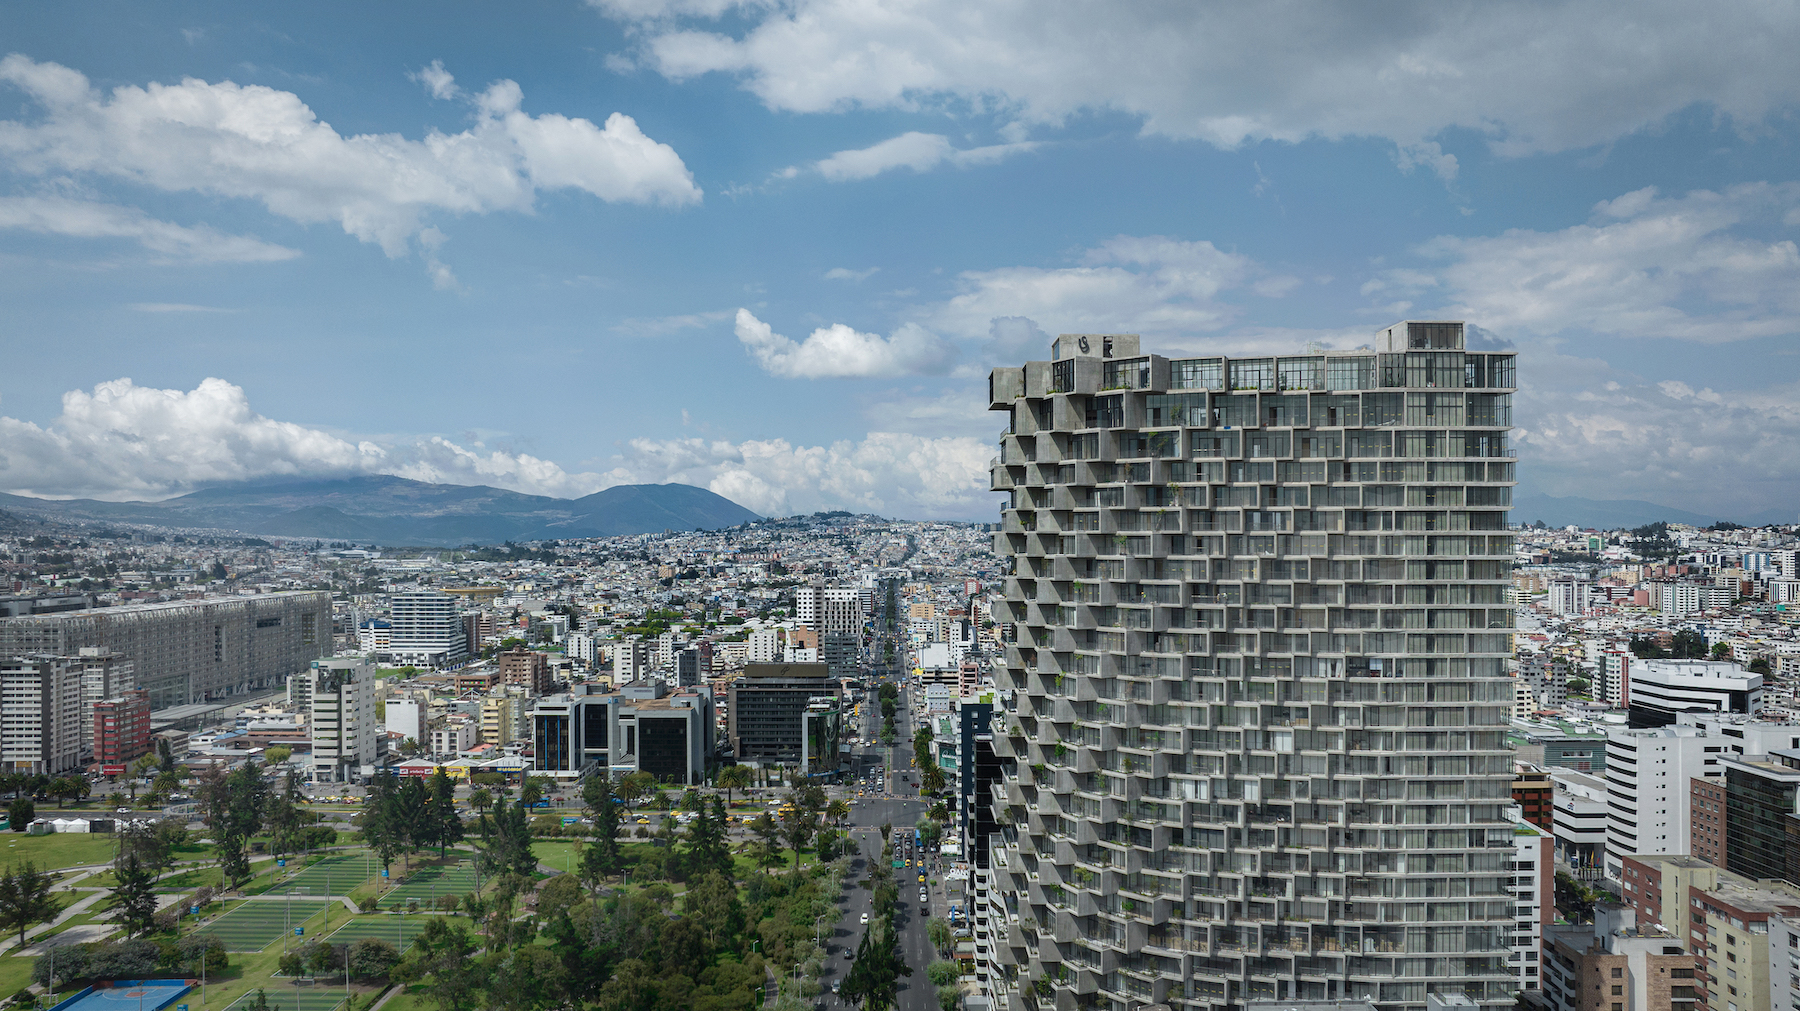 The 427-ft-tall IQON will be in sharp contrast to Quito's mostly low-rise skyline. Image credit: Pablo Casals Aguirre